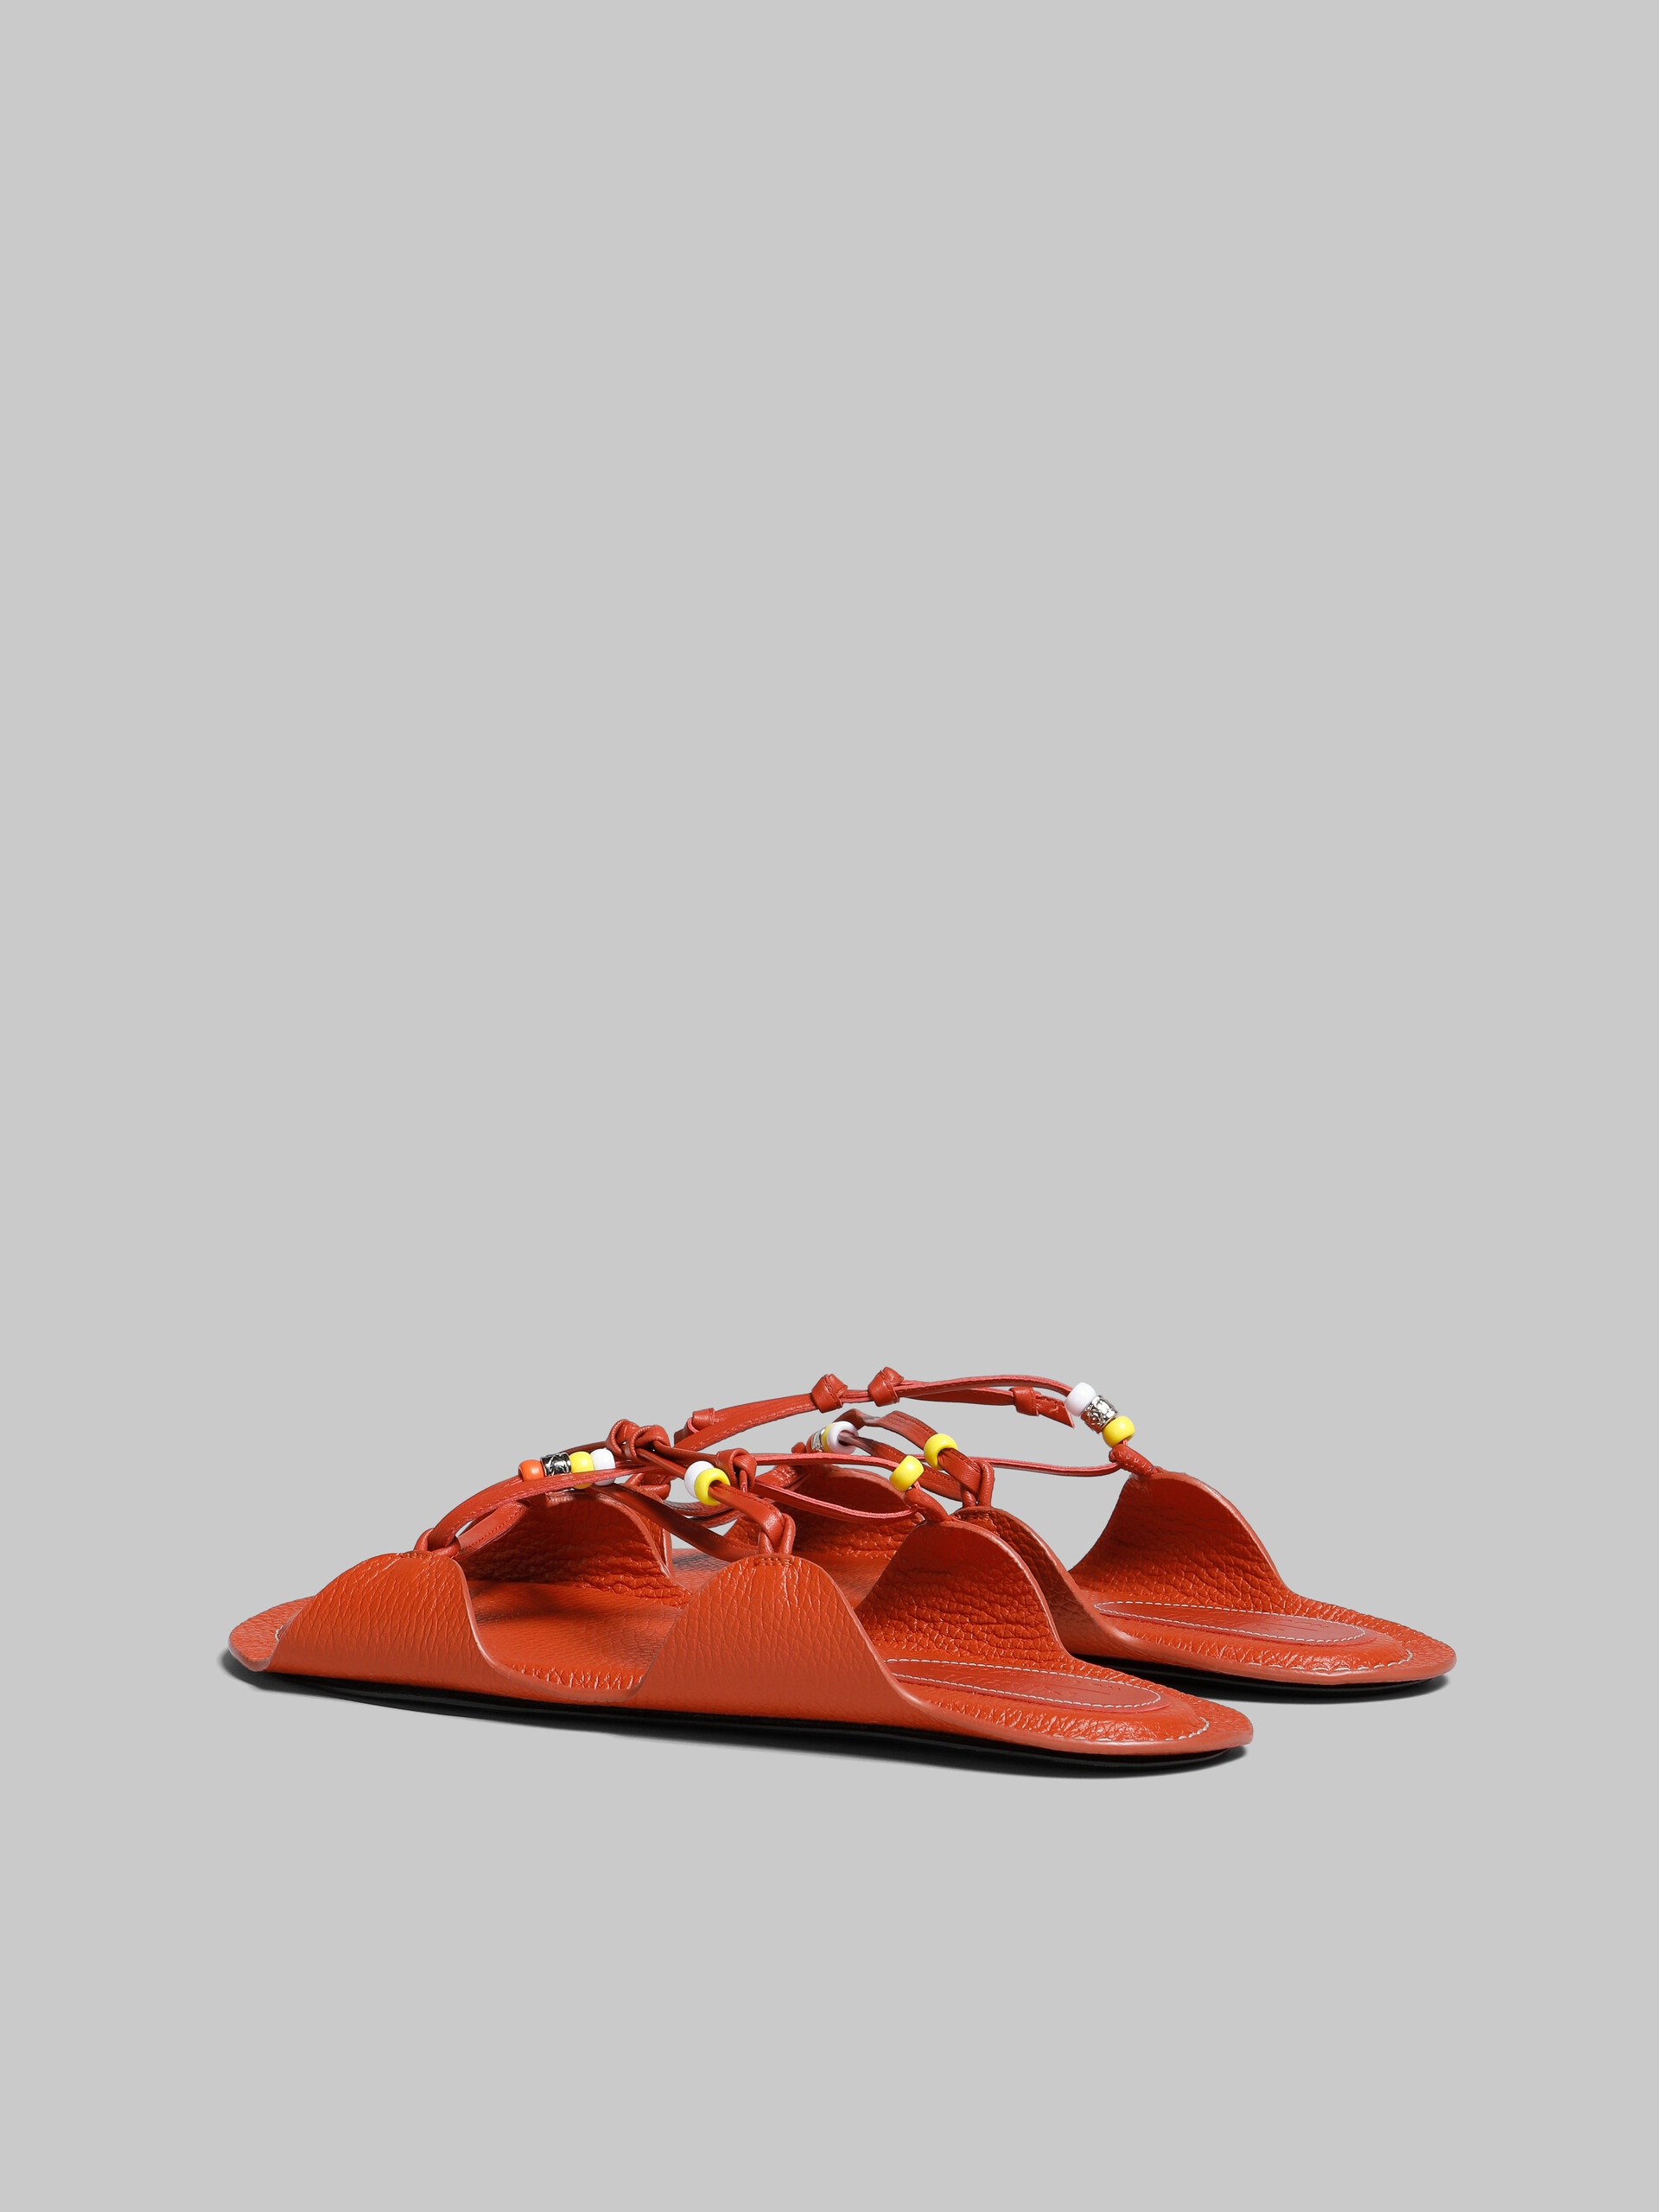 MARNI X NO VACANCY INN - BRICK RED LEATHER SANDALS WITH BEADS - 3